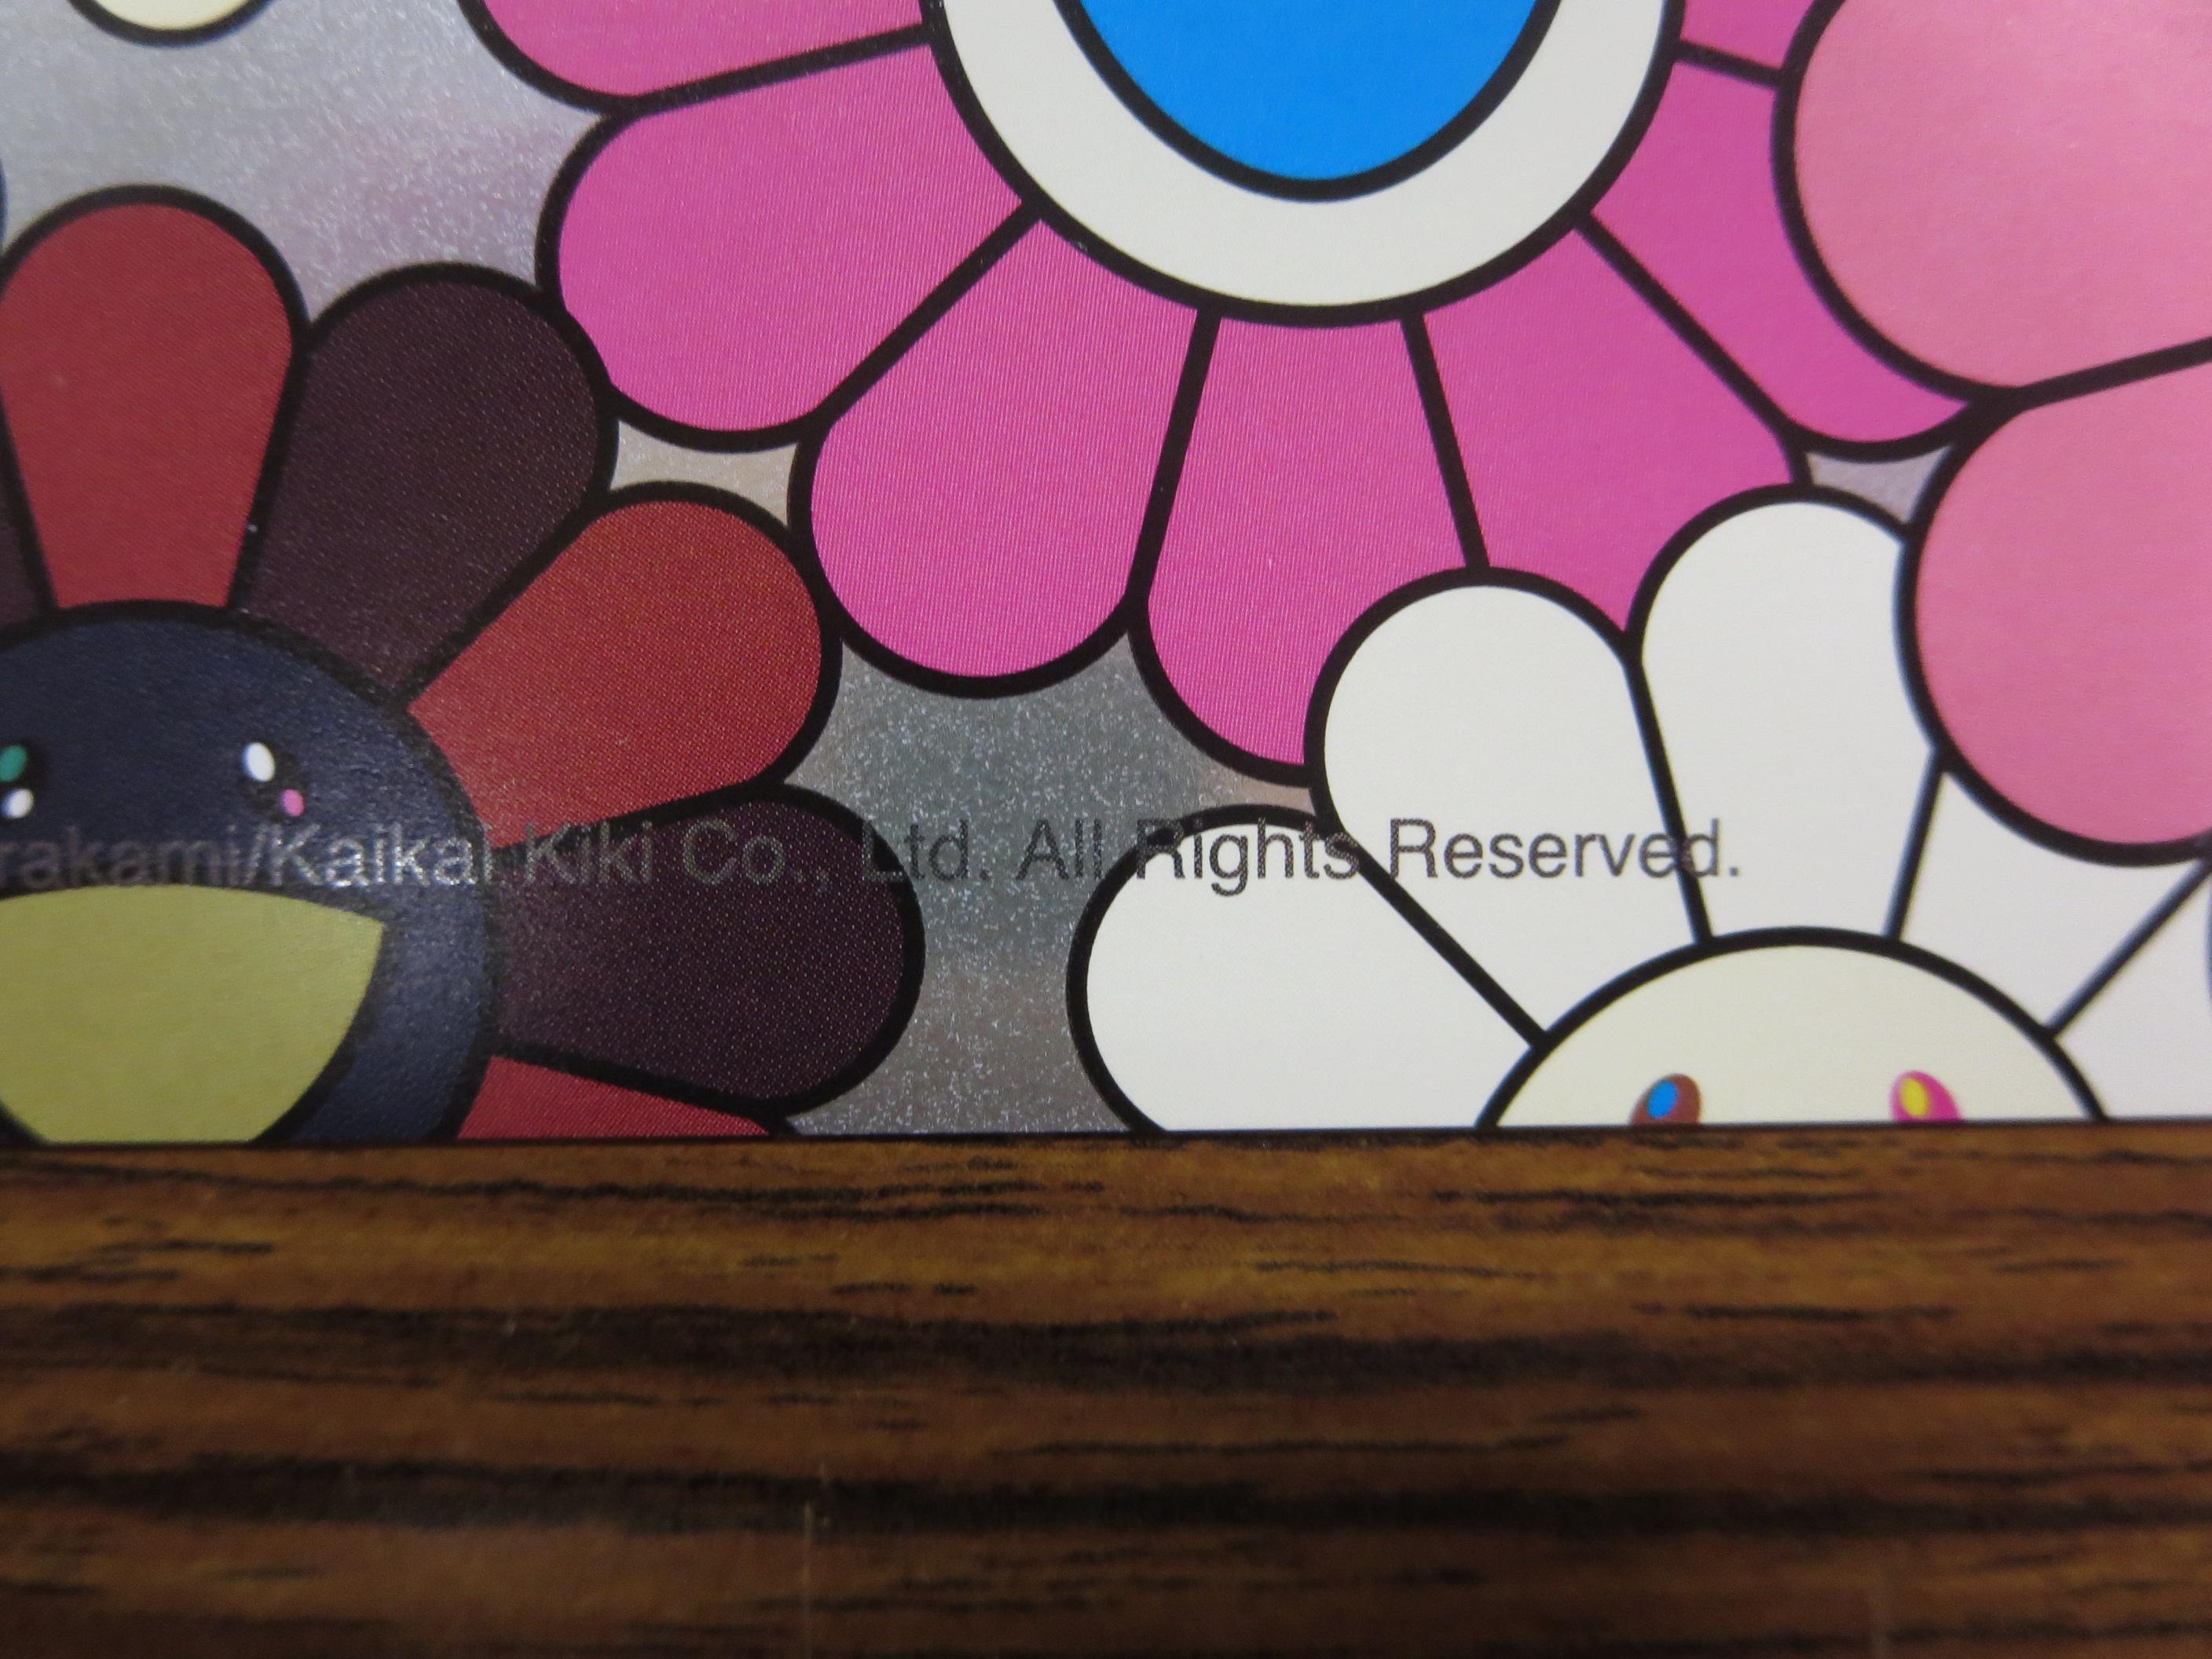 An Homage to Monopink, 1960E. Limited Edition (print) by Takashi Murakami signed 5